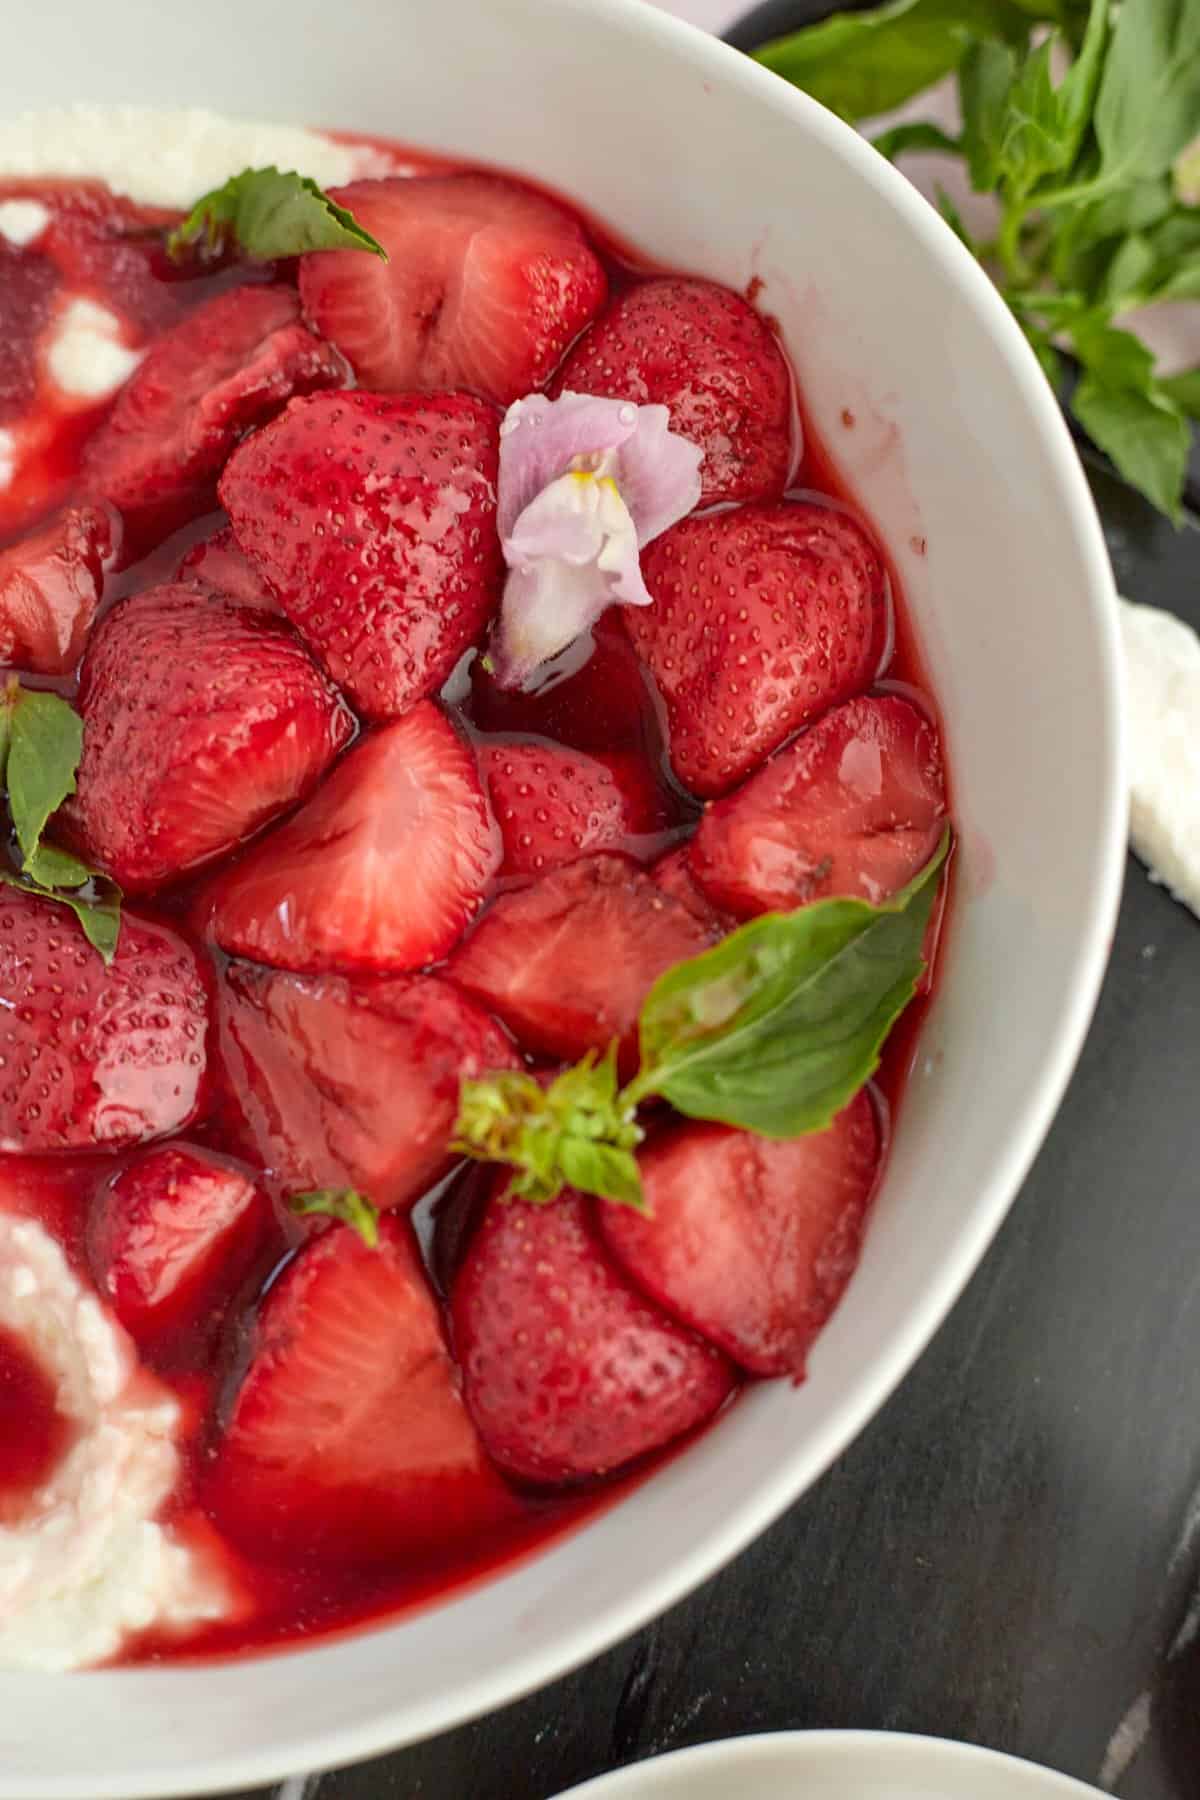 Whipped goat cheese and strawberries in a bowl with fresh basil